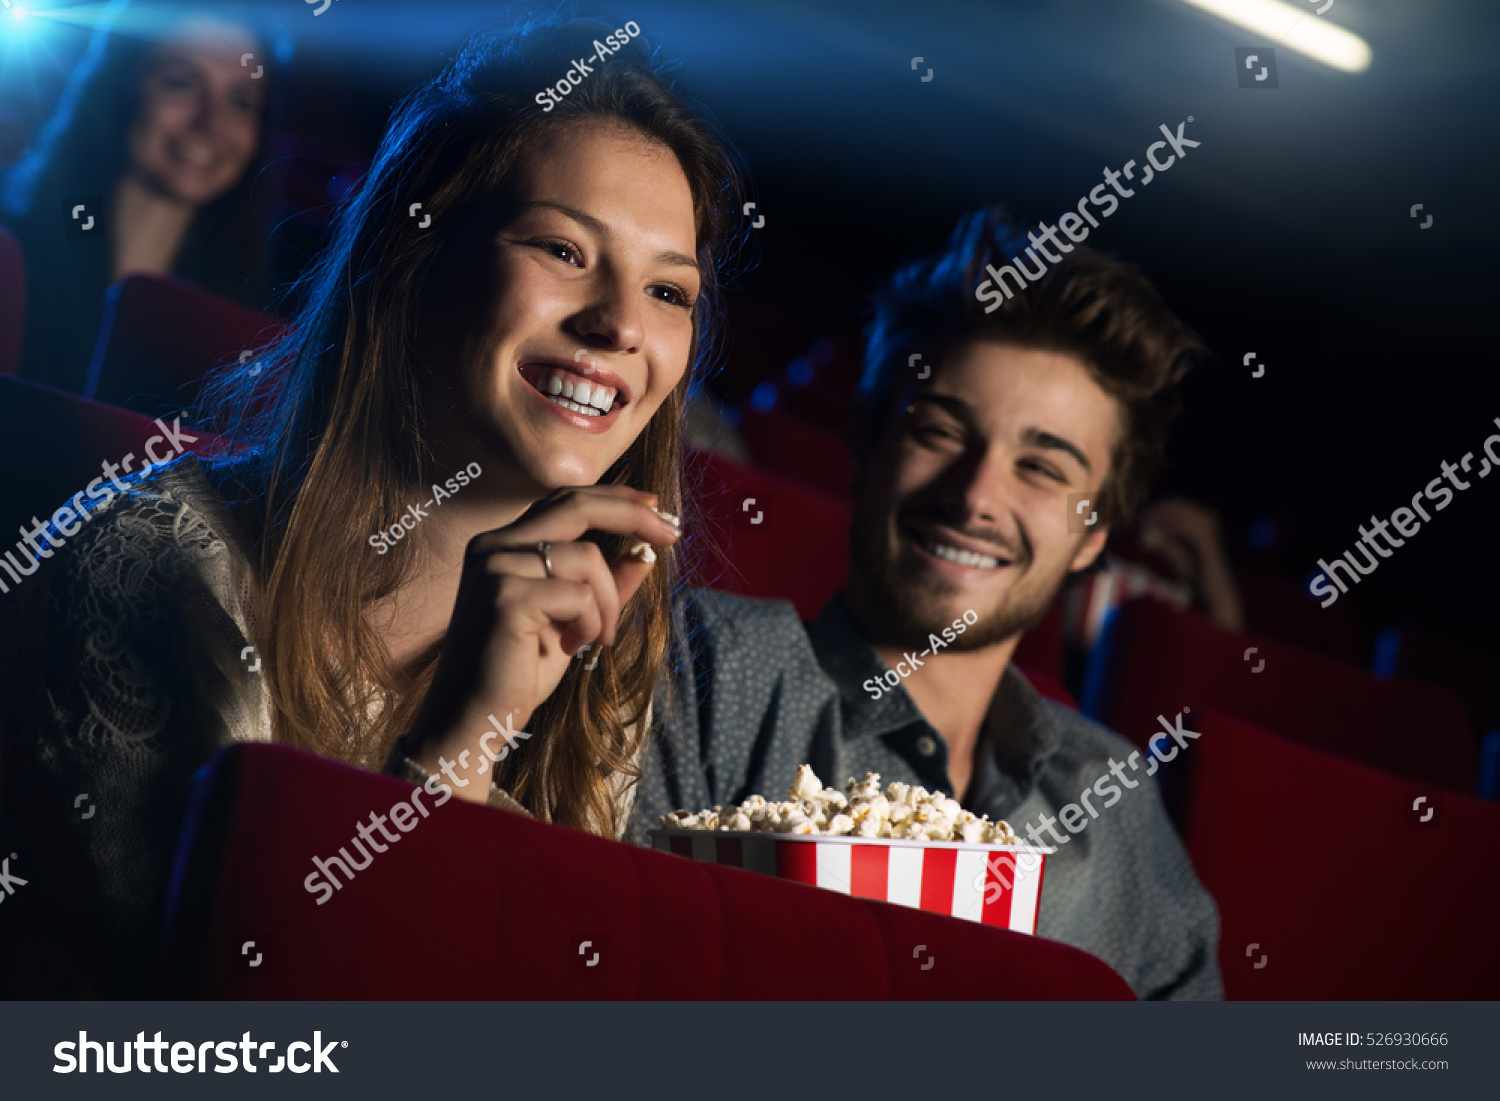 Young loving couple at the cinema watching a movie and smiling, people sitting on background #526930666